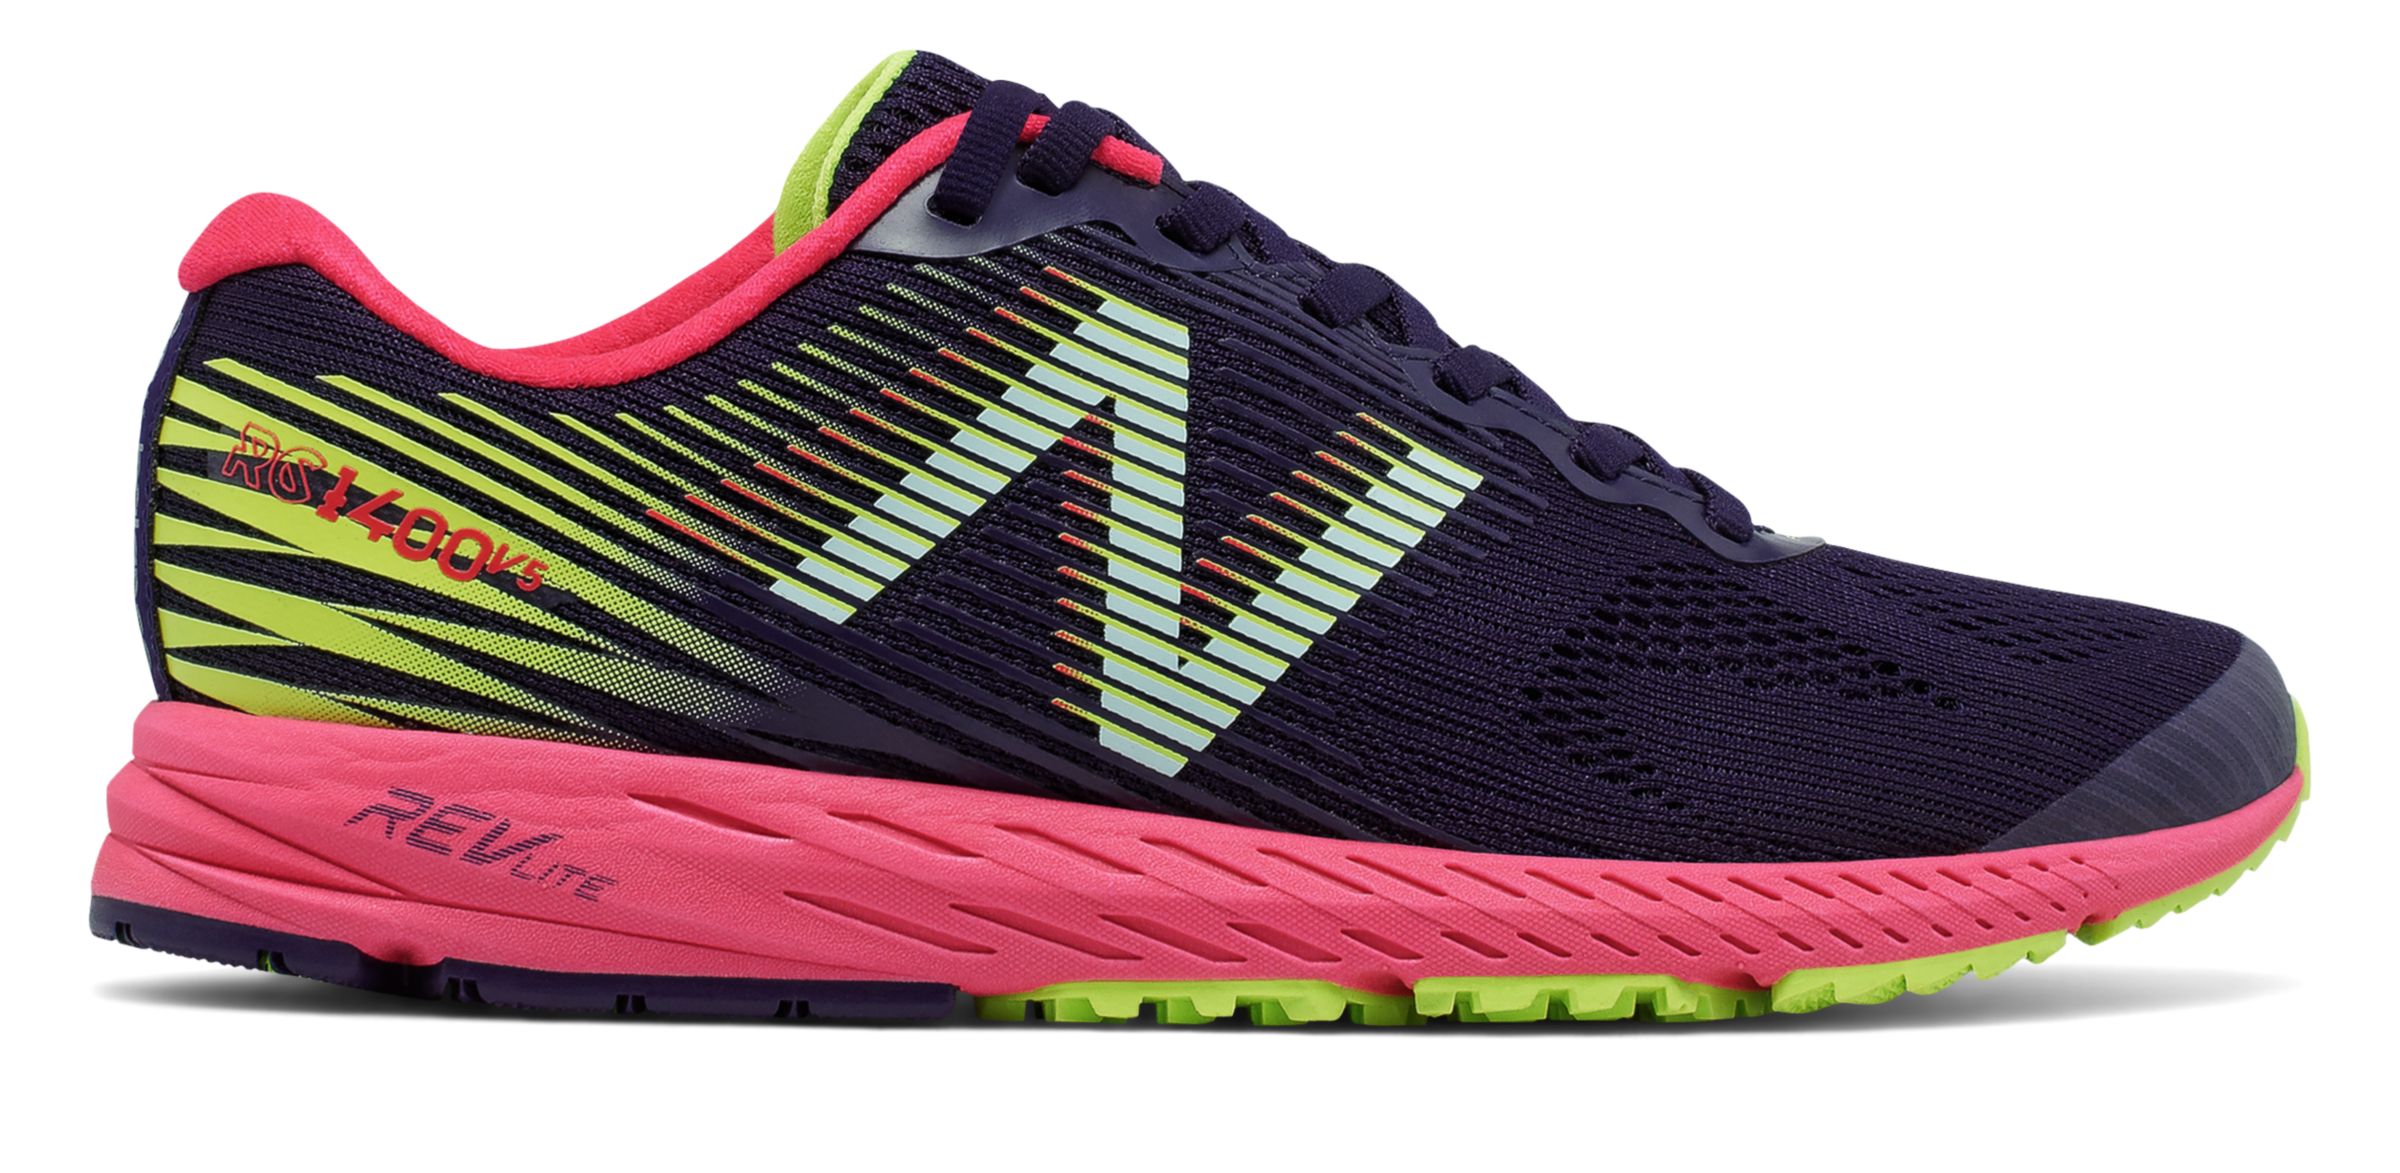 1400v5 - Women's 1400 - Running, Spikes/Competition - New Balance